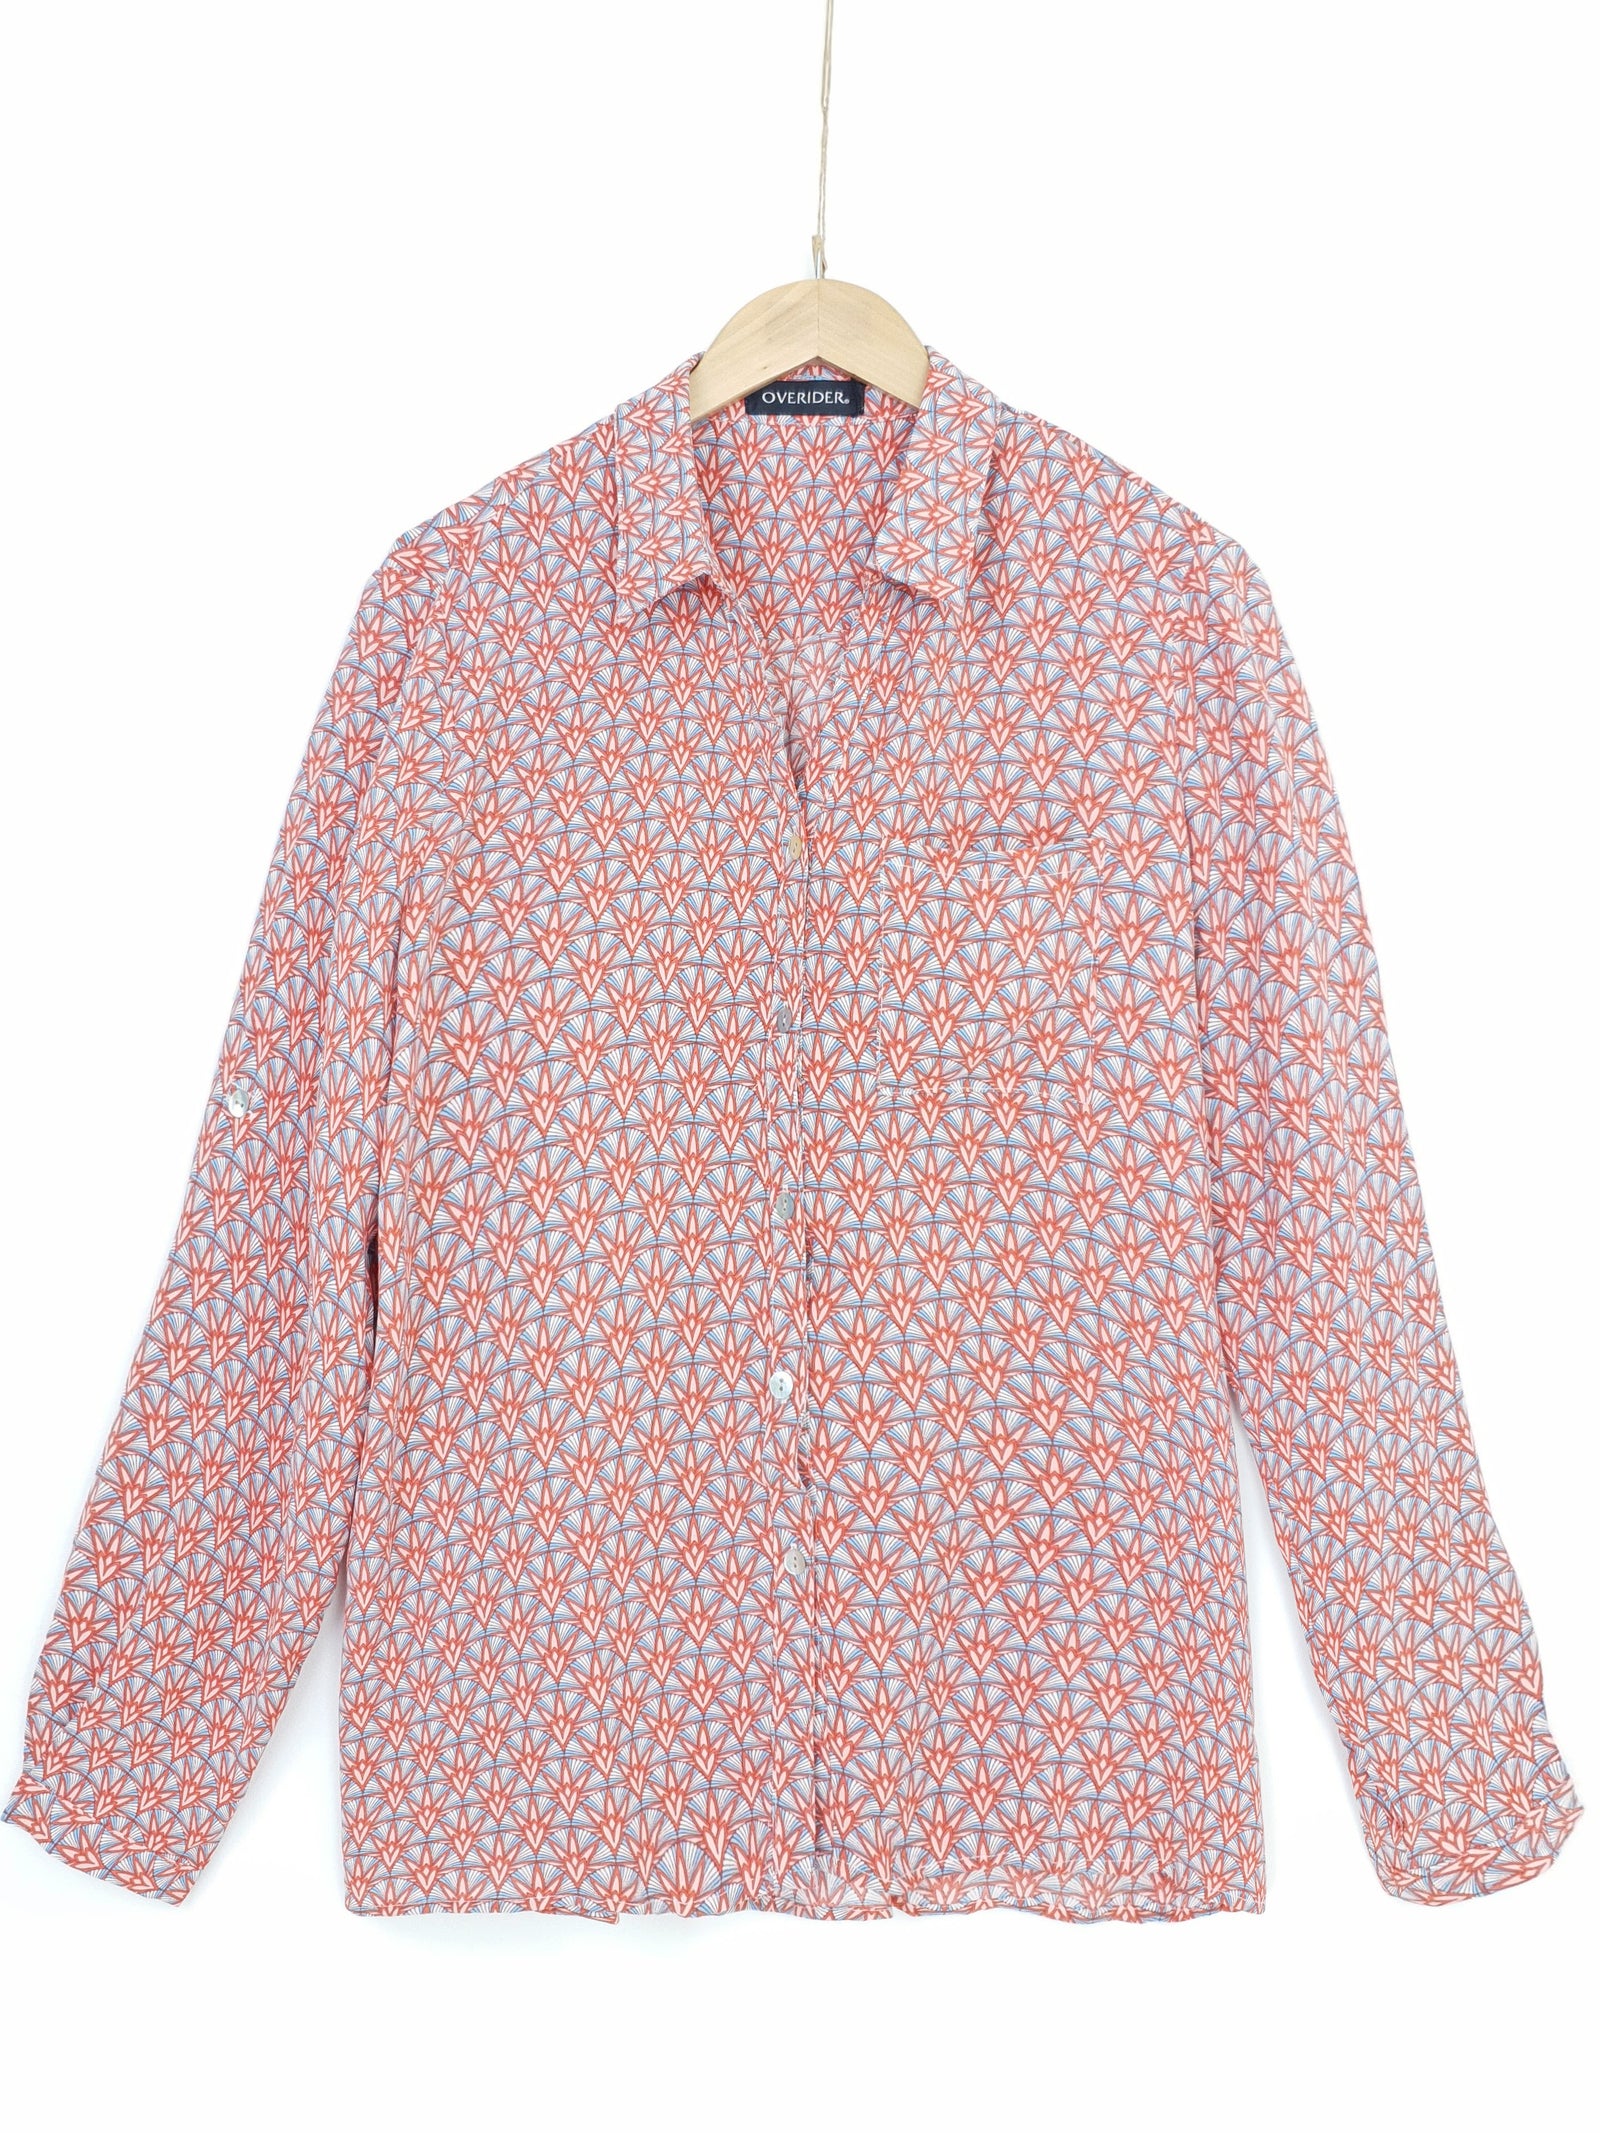 CALINA | Patterned Fluid Shirt | Red & Blue